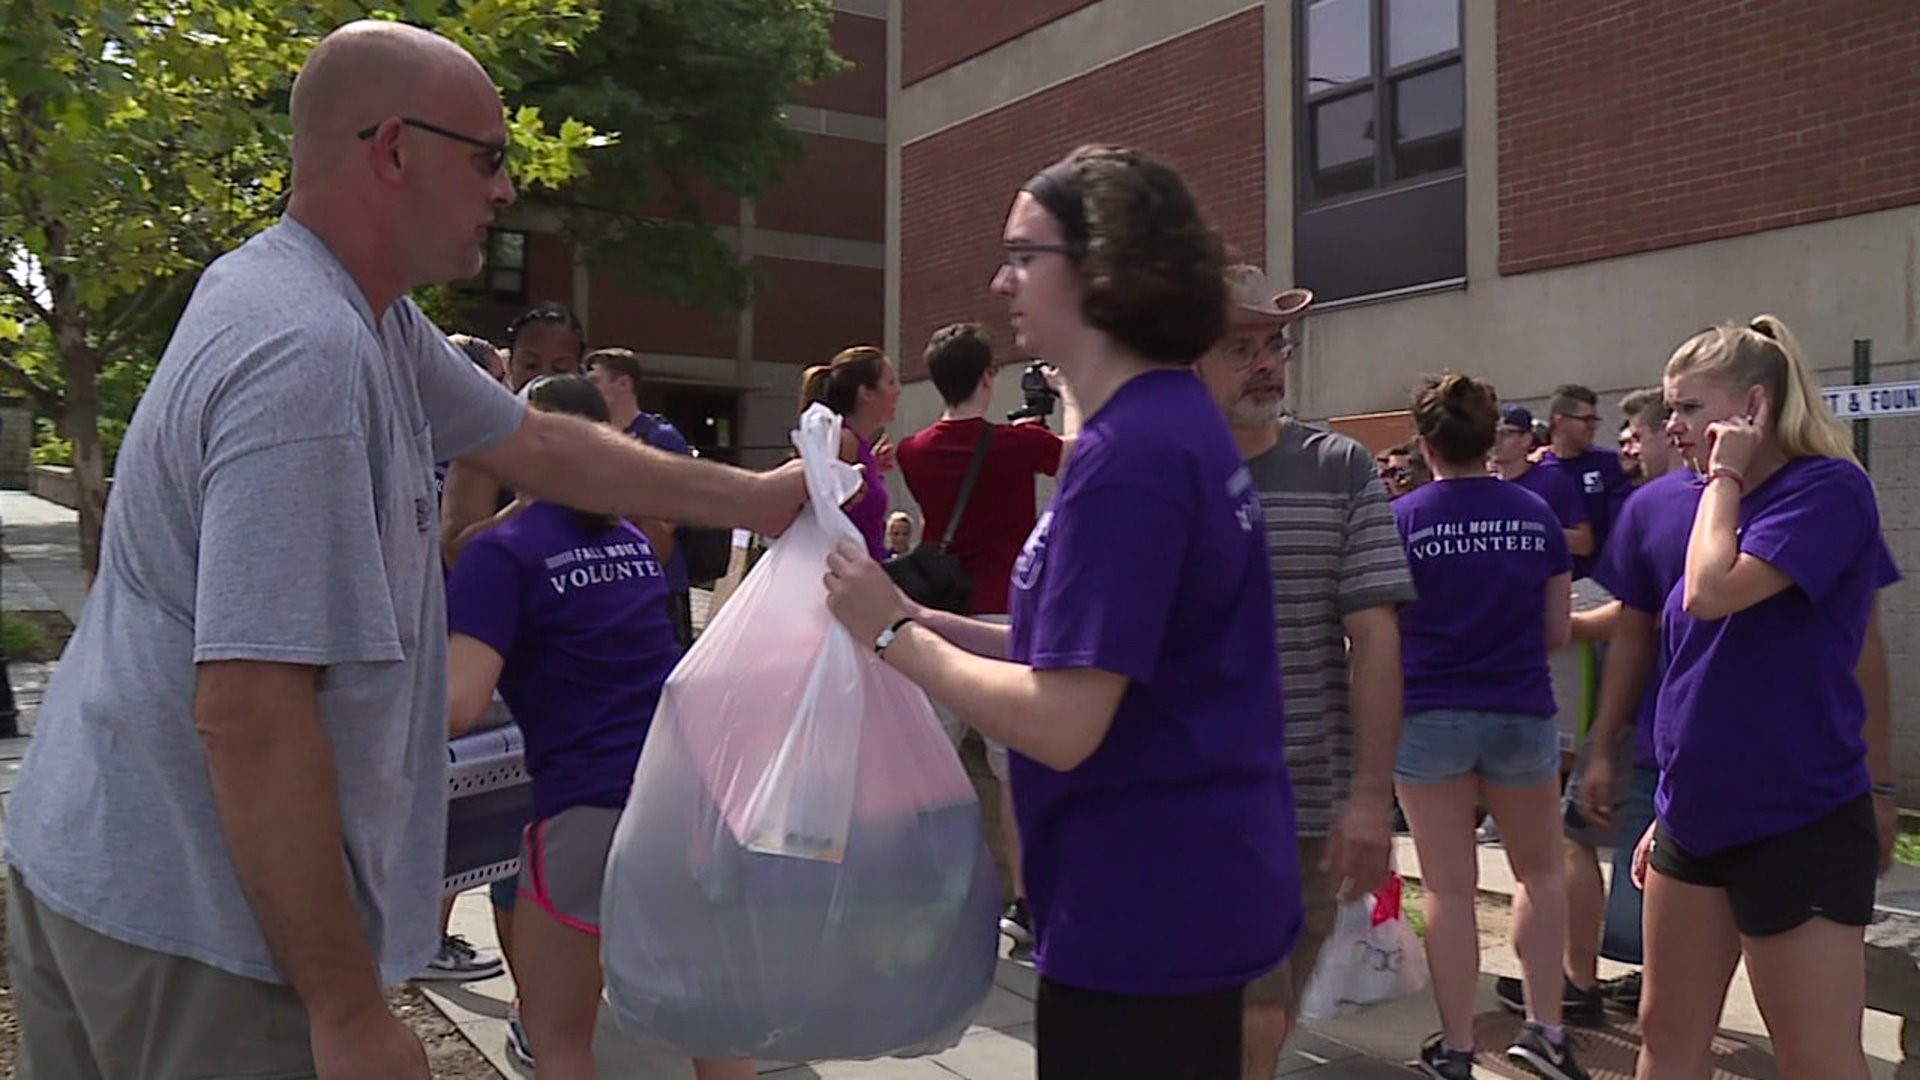 Move-in Day at the University of Scranton